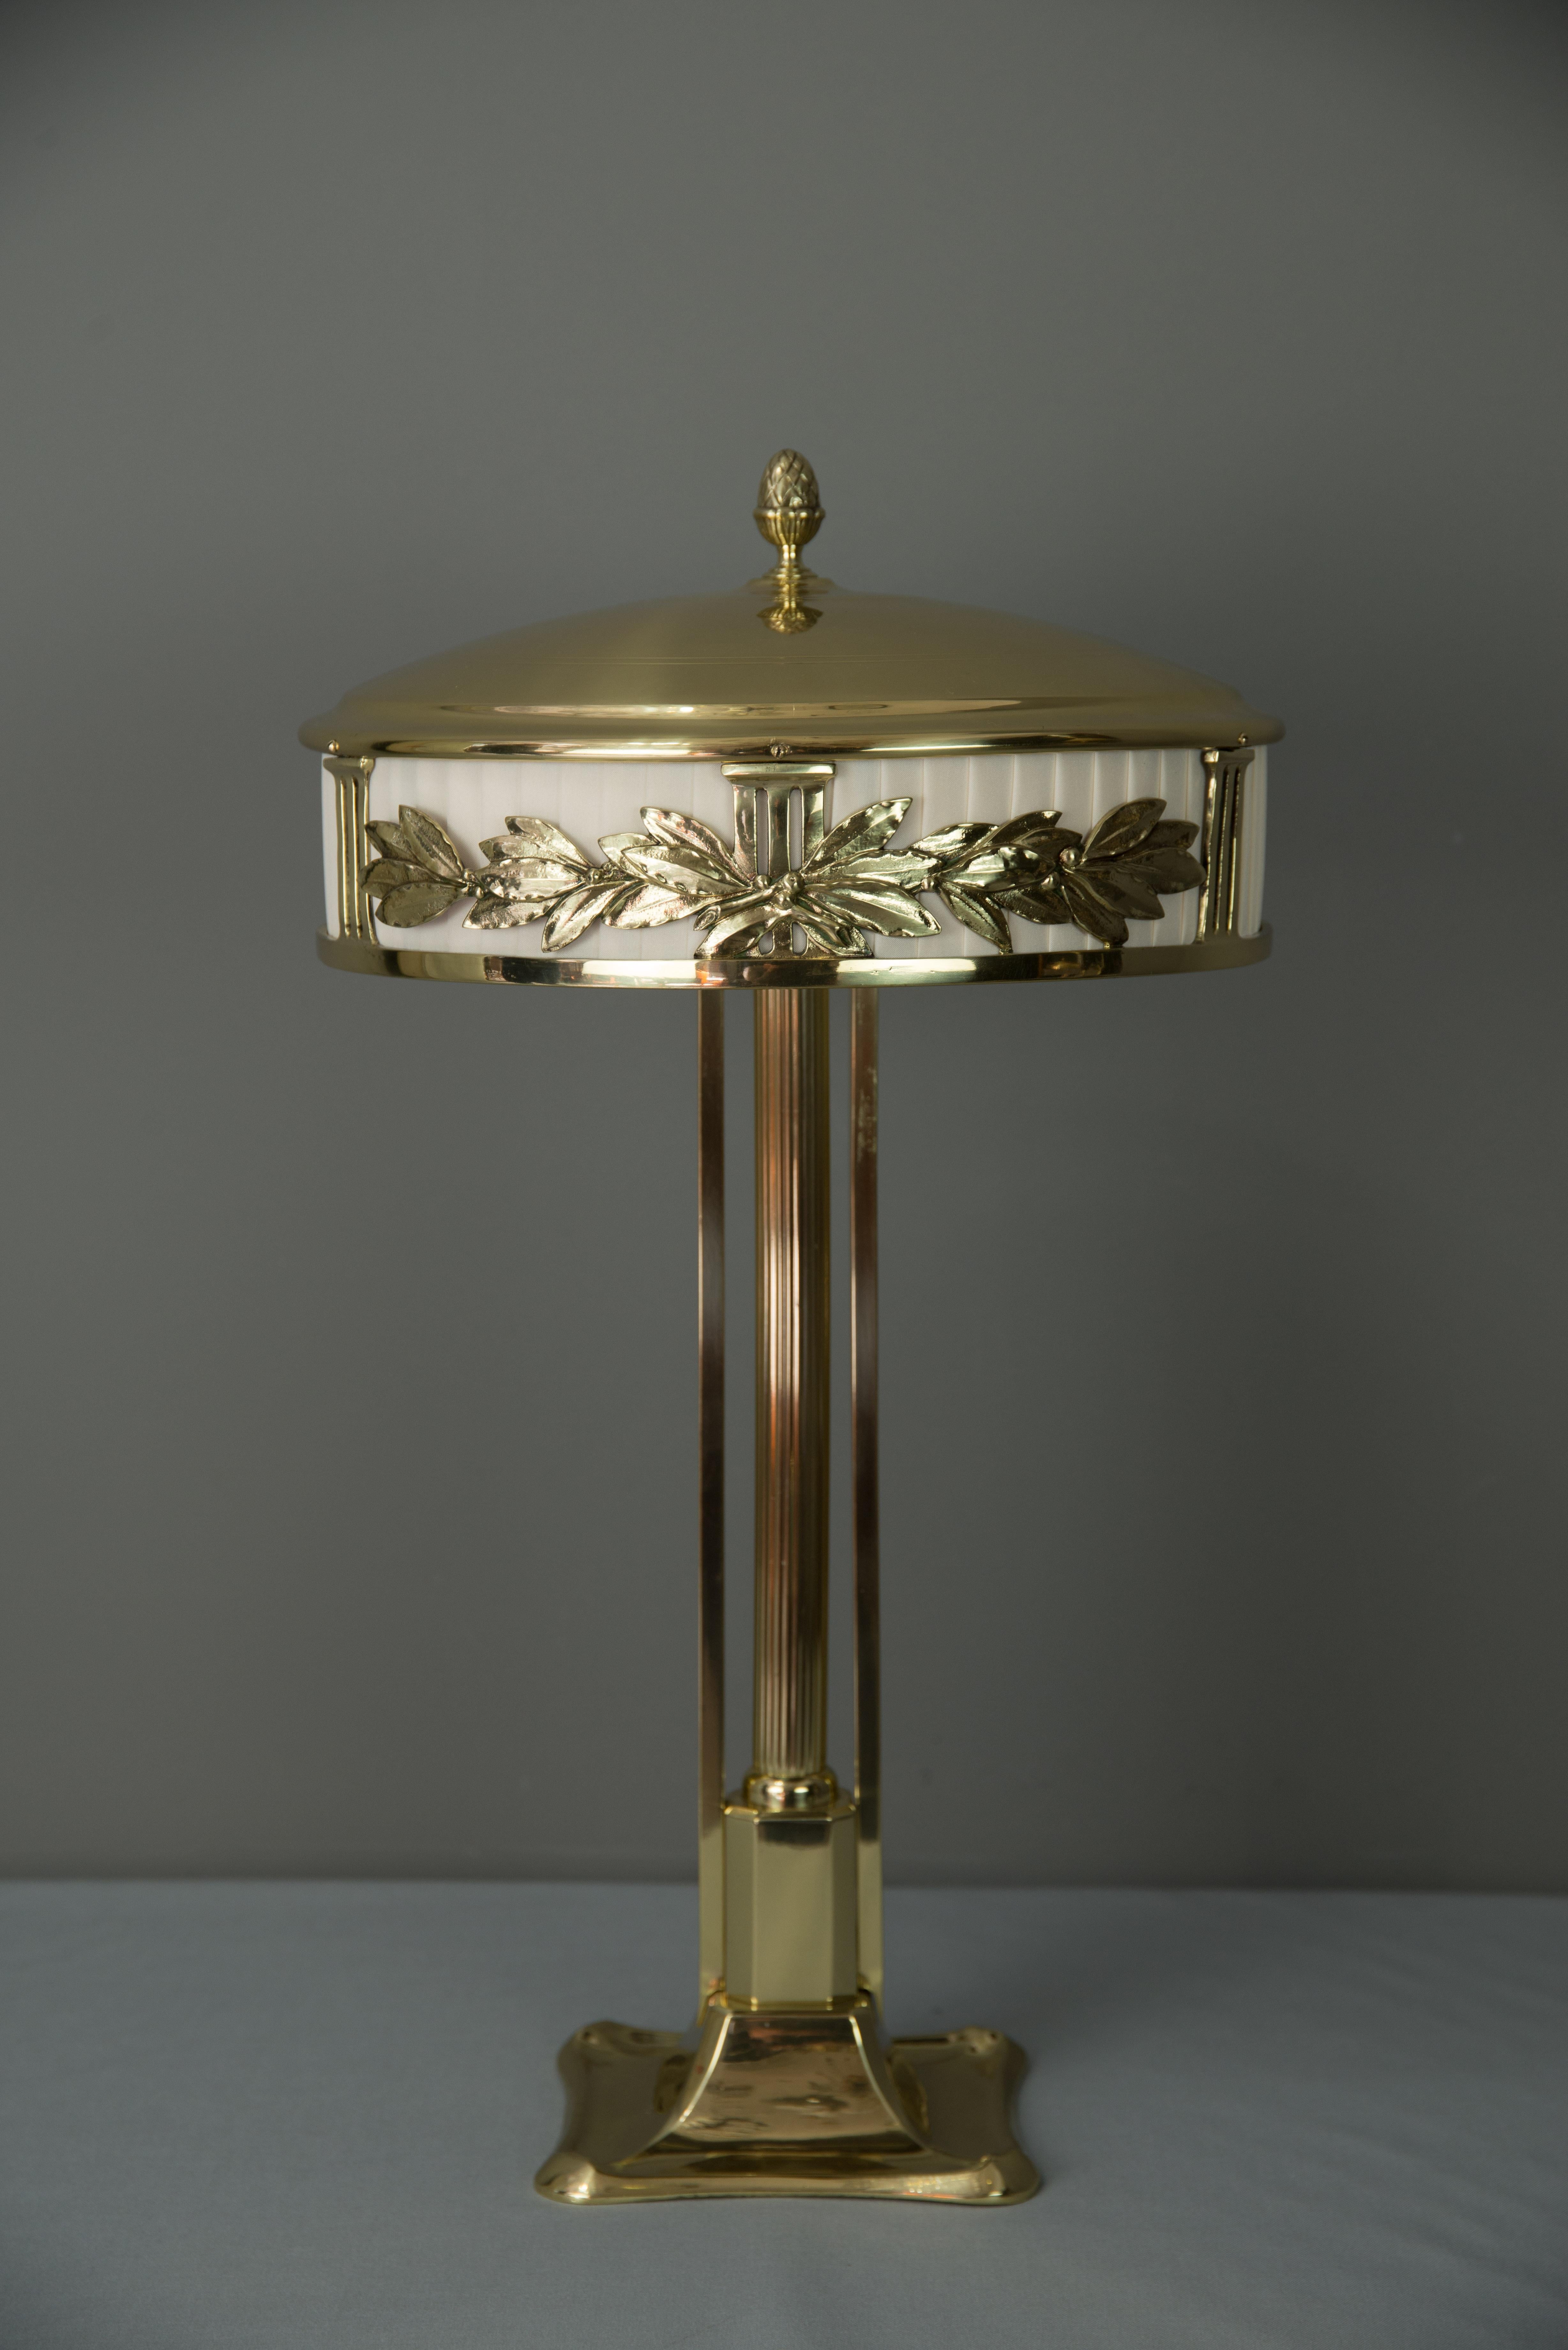 Early 20th Century Jugendstil Table Lamp with Fabric, circa 1909